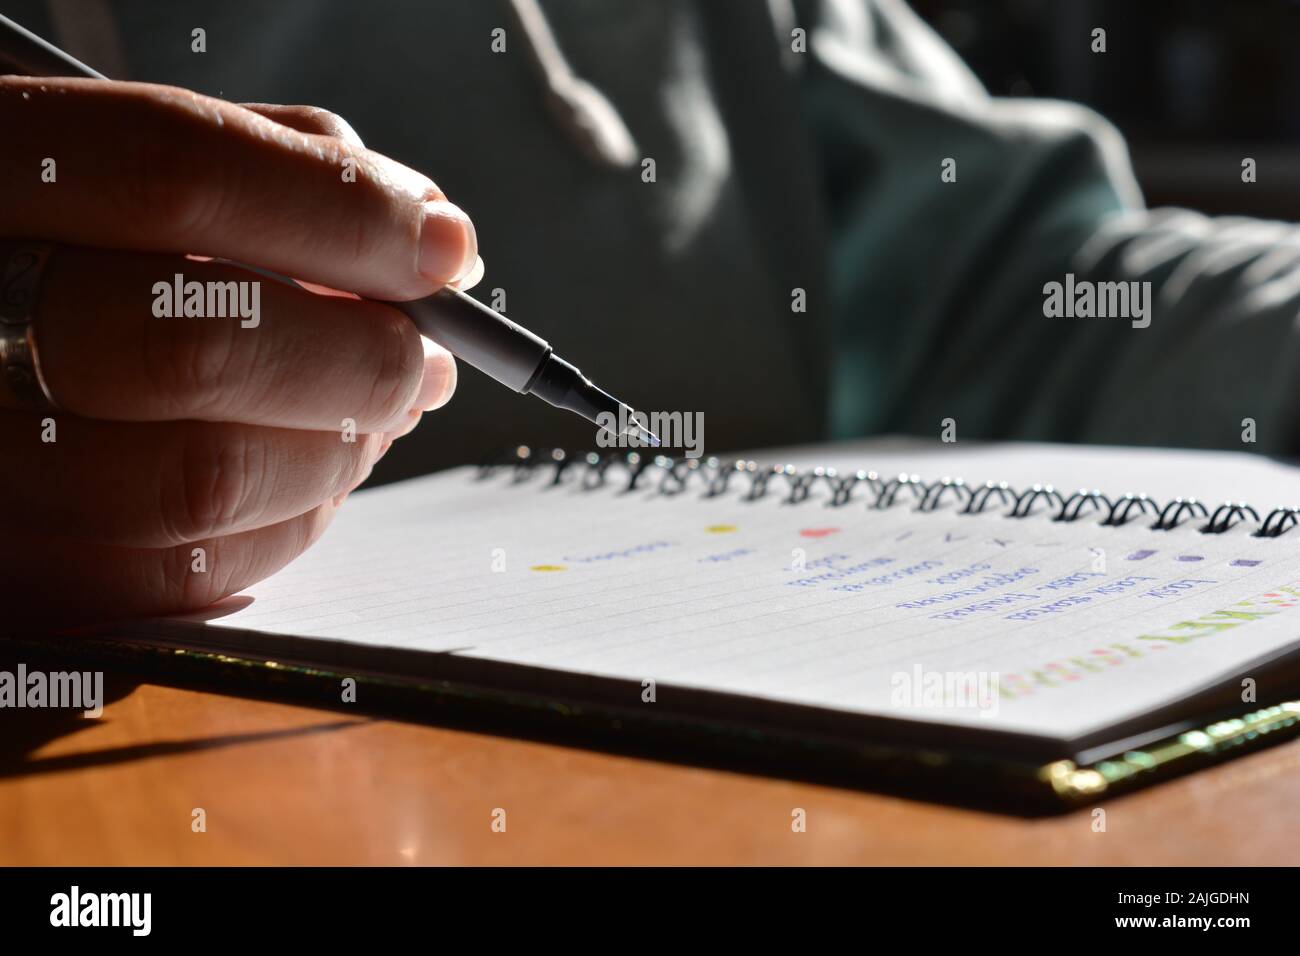 Woman writing in a bullet journal, low angle mid section view,  selective focus on pen nib. Stock Photo